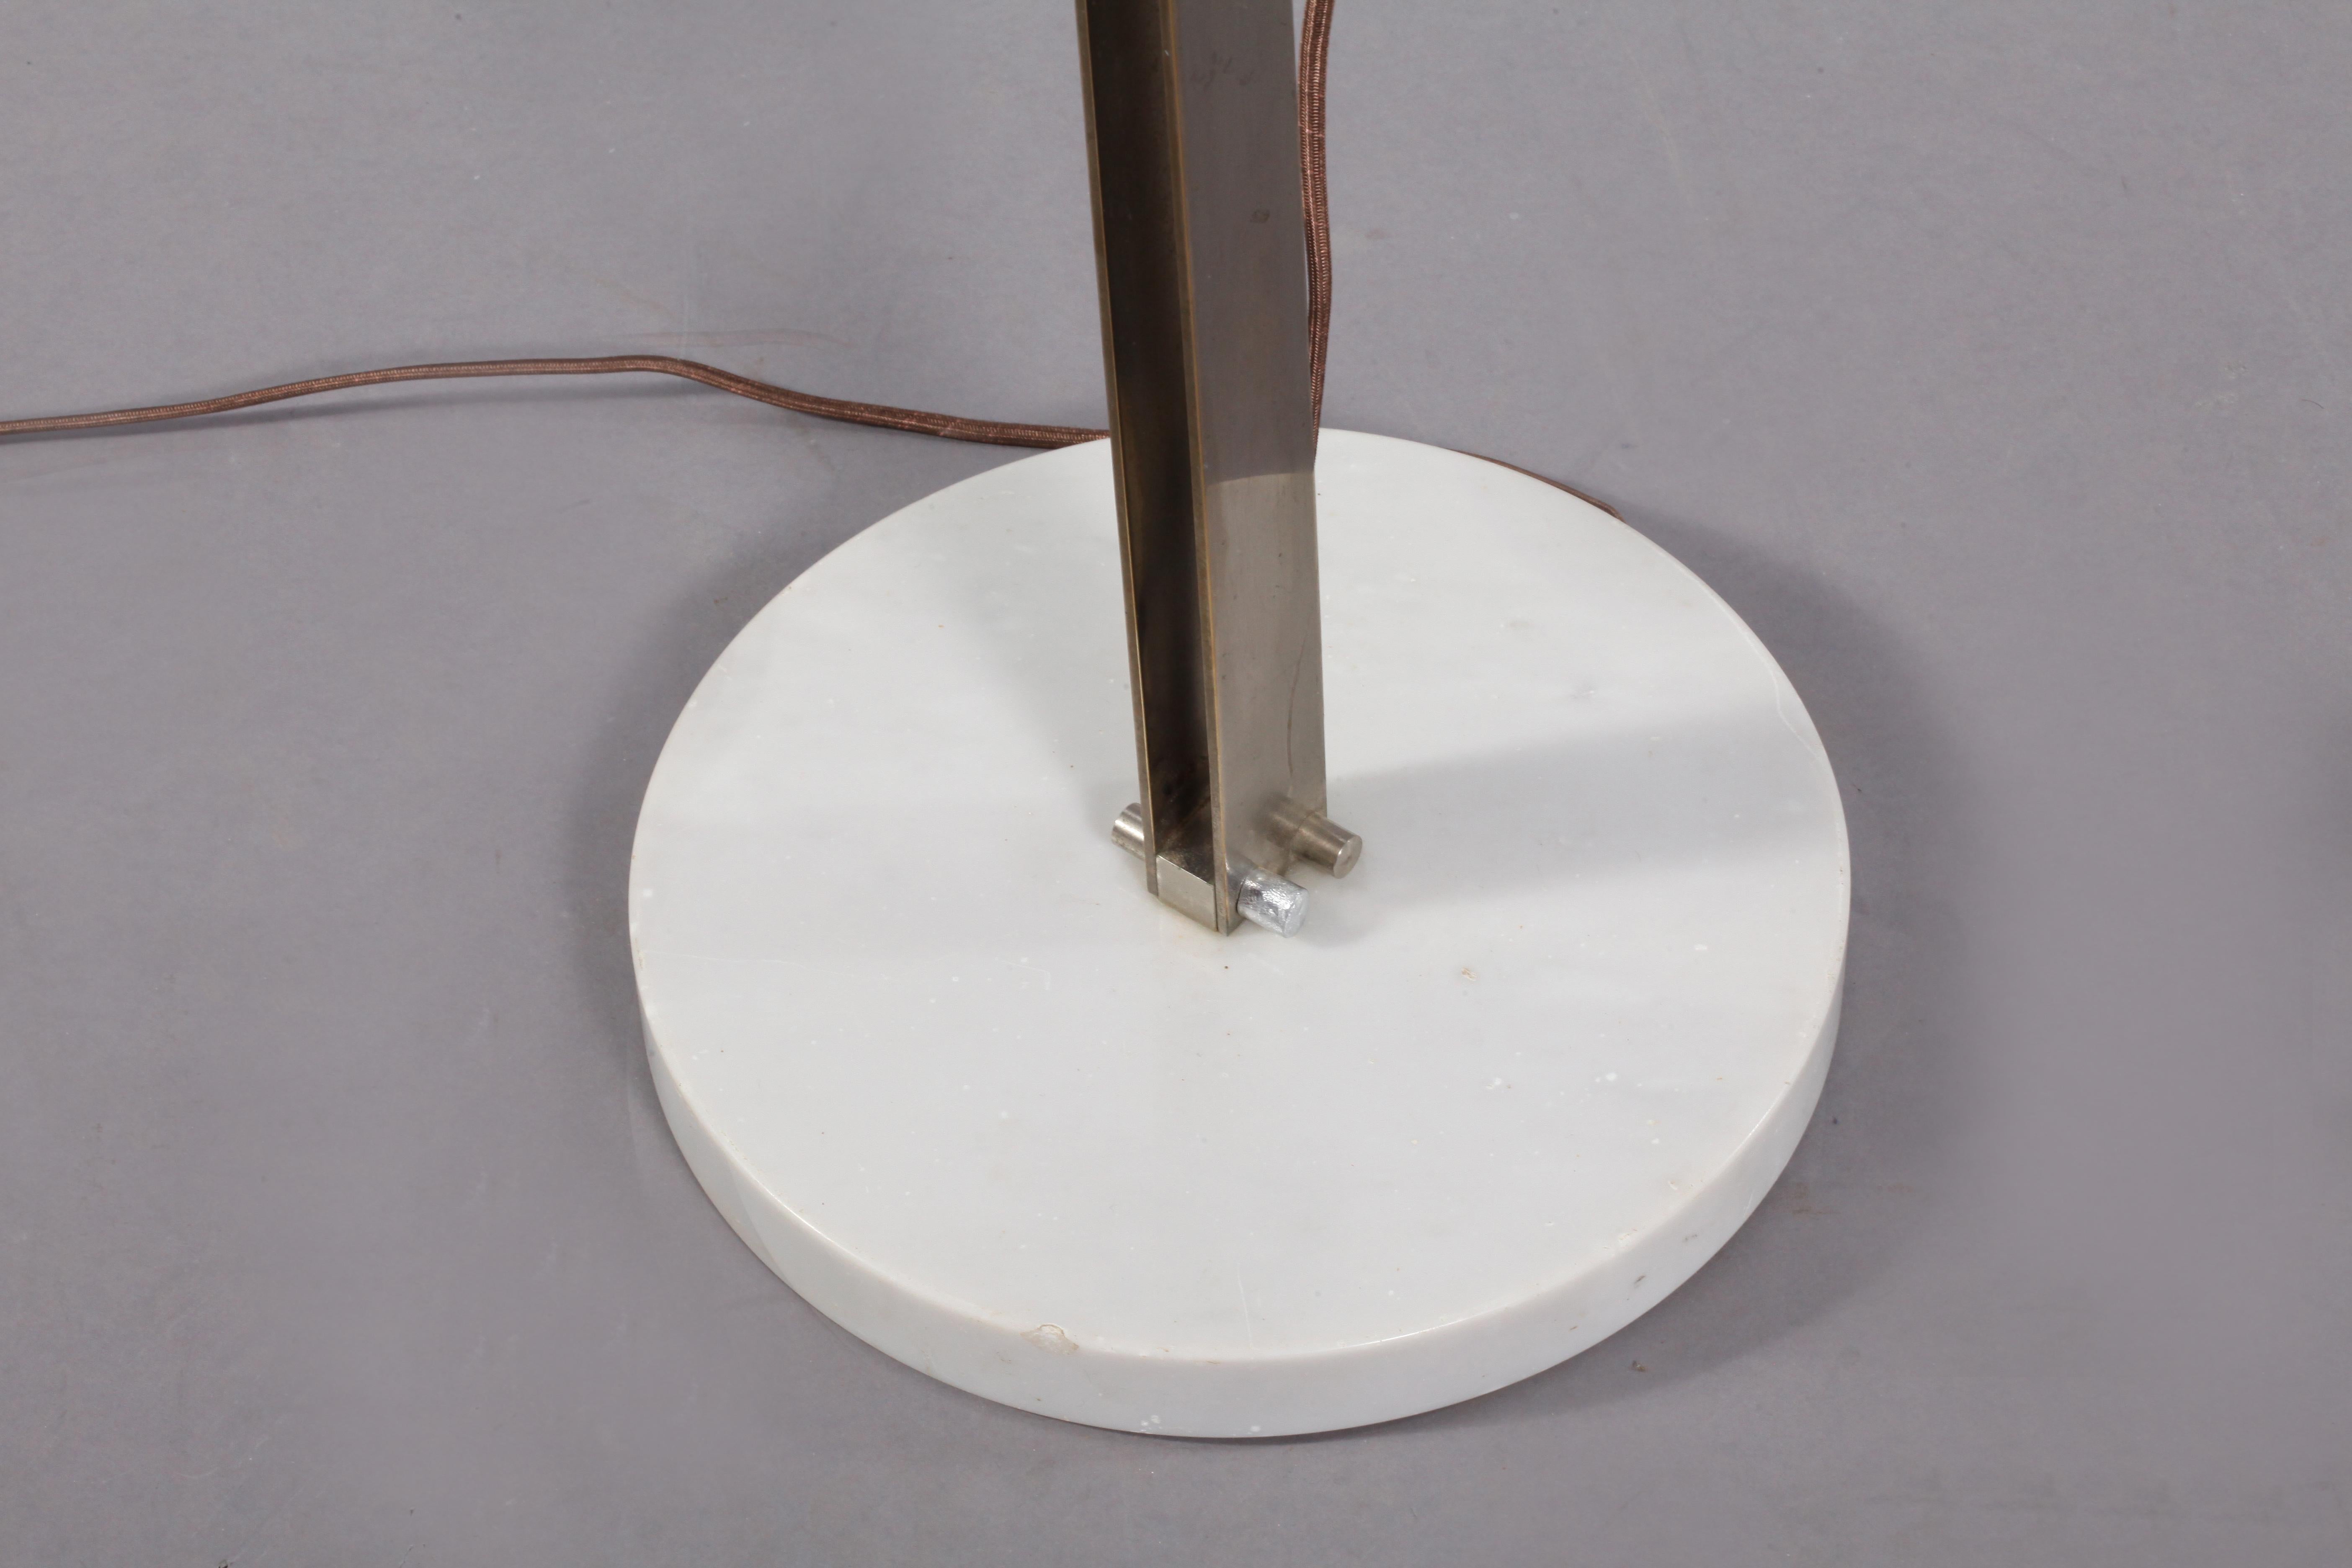 Sculptural floor lamp by Goffredo Reggiani from circa 1960. Made of satin steel, copper and white plexiglass on a marble base. European plug. 
Measures: H 151 cm x W 25 cm x D 25 cm.